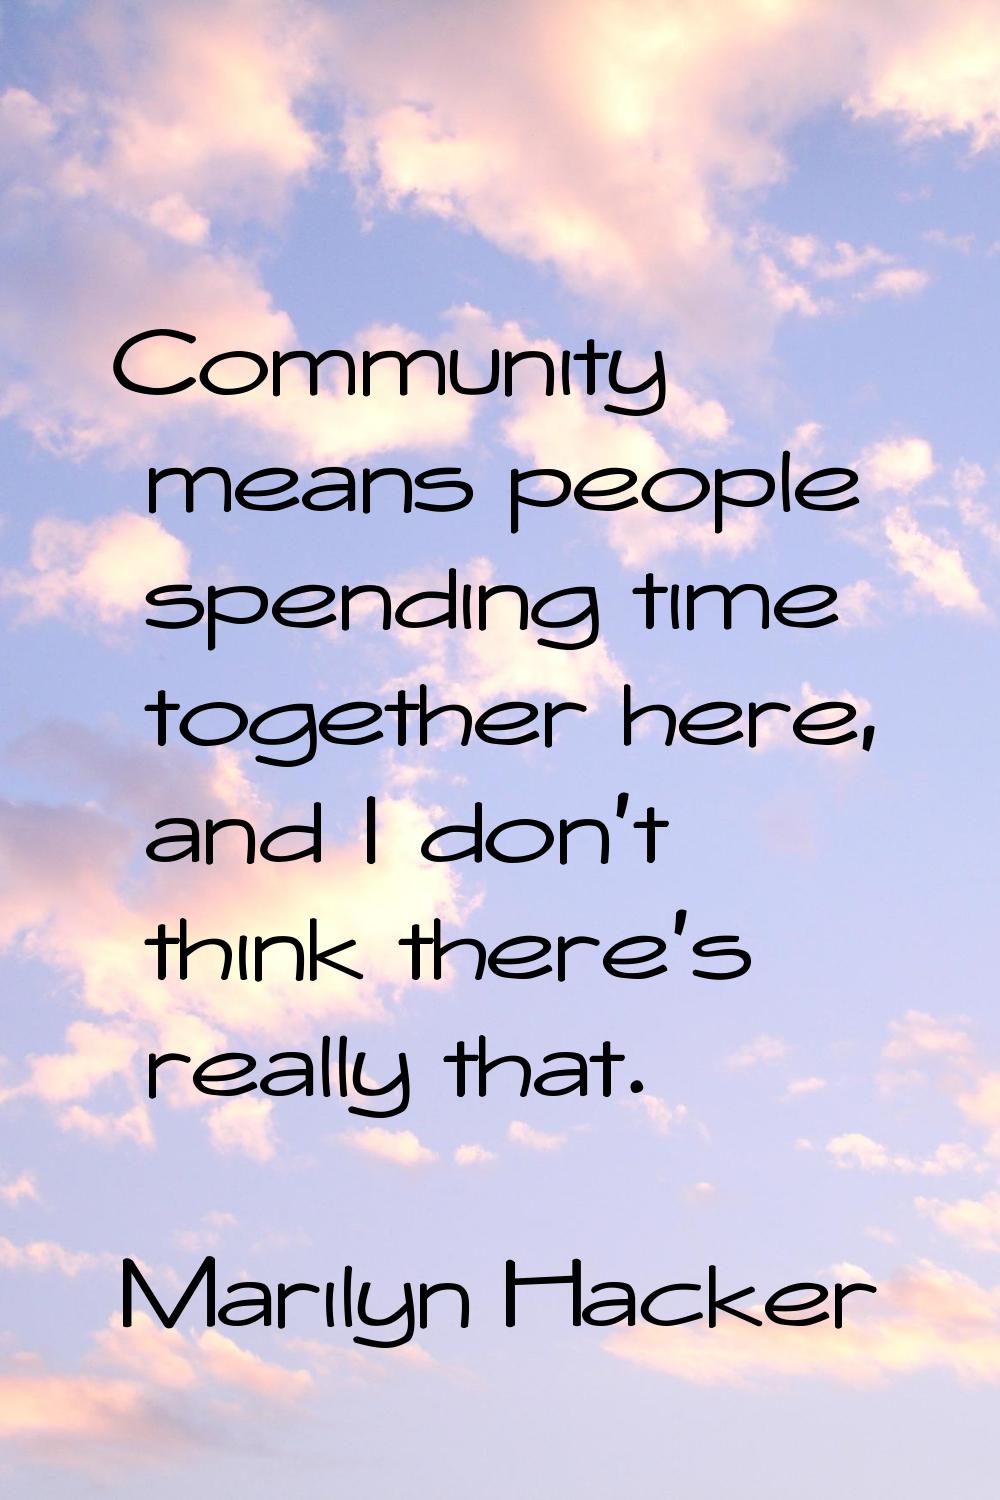 Community means people spending time together here, and I don't think there's really that.